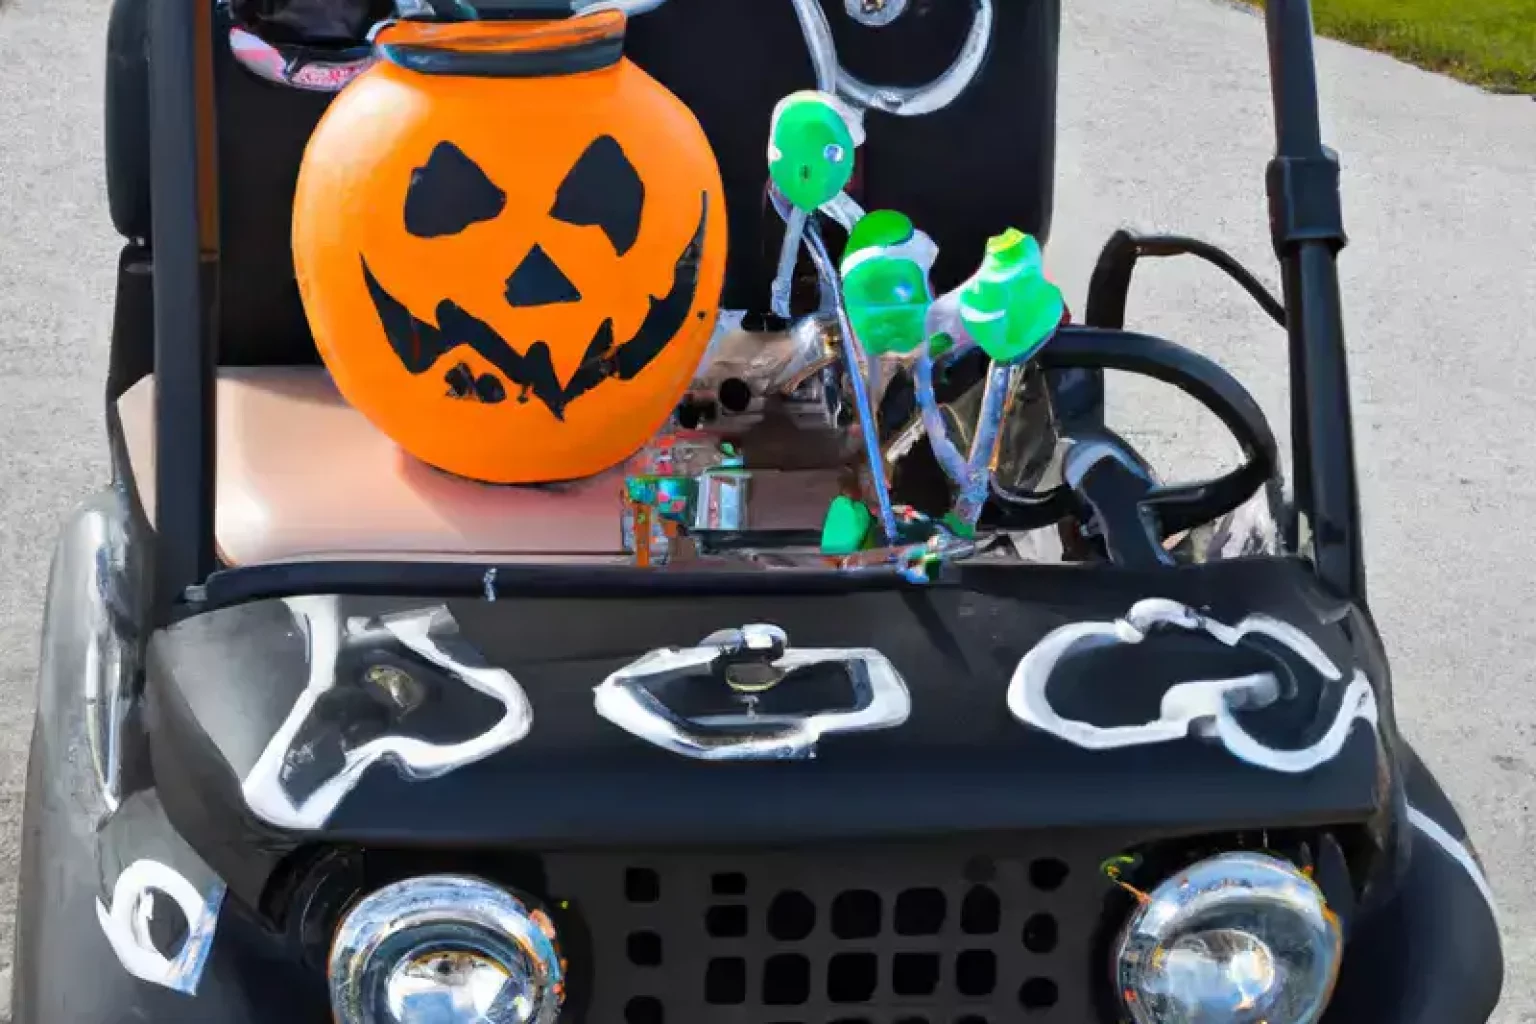 How to decorate a golf cart for halloween